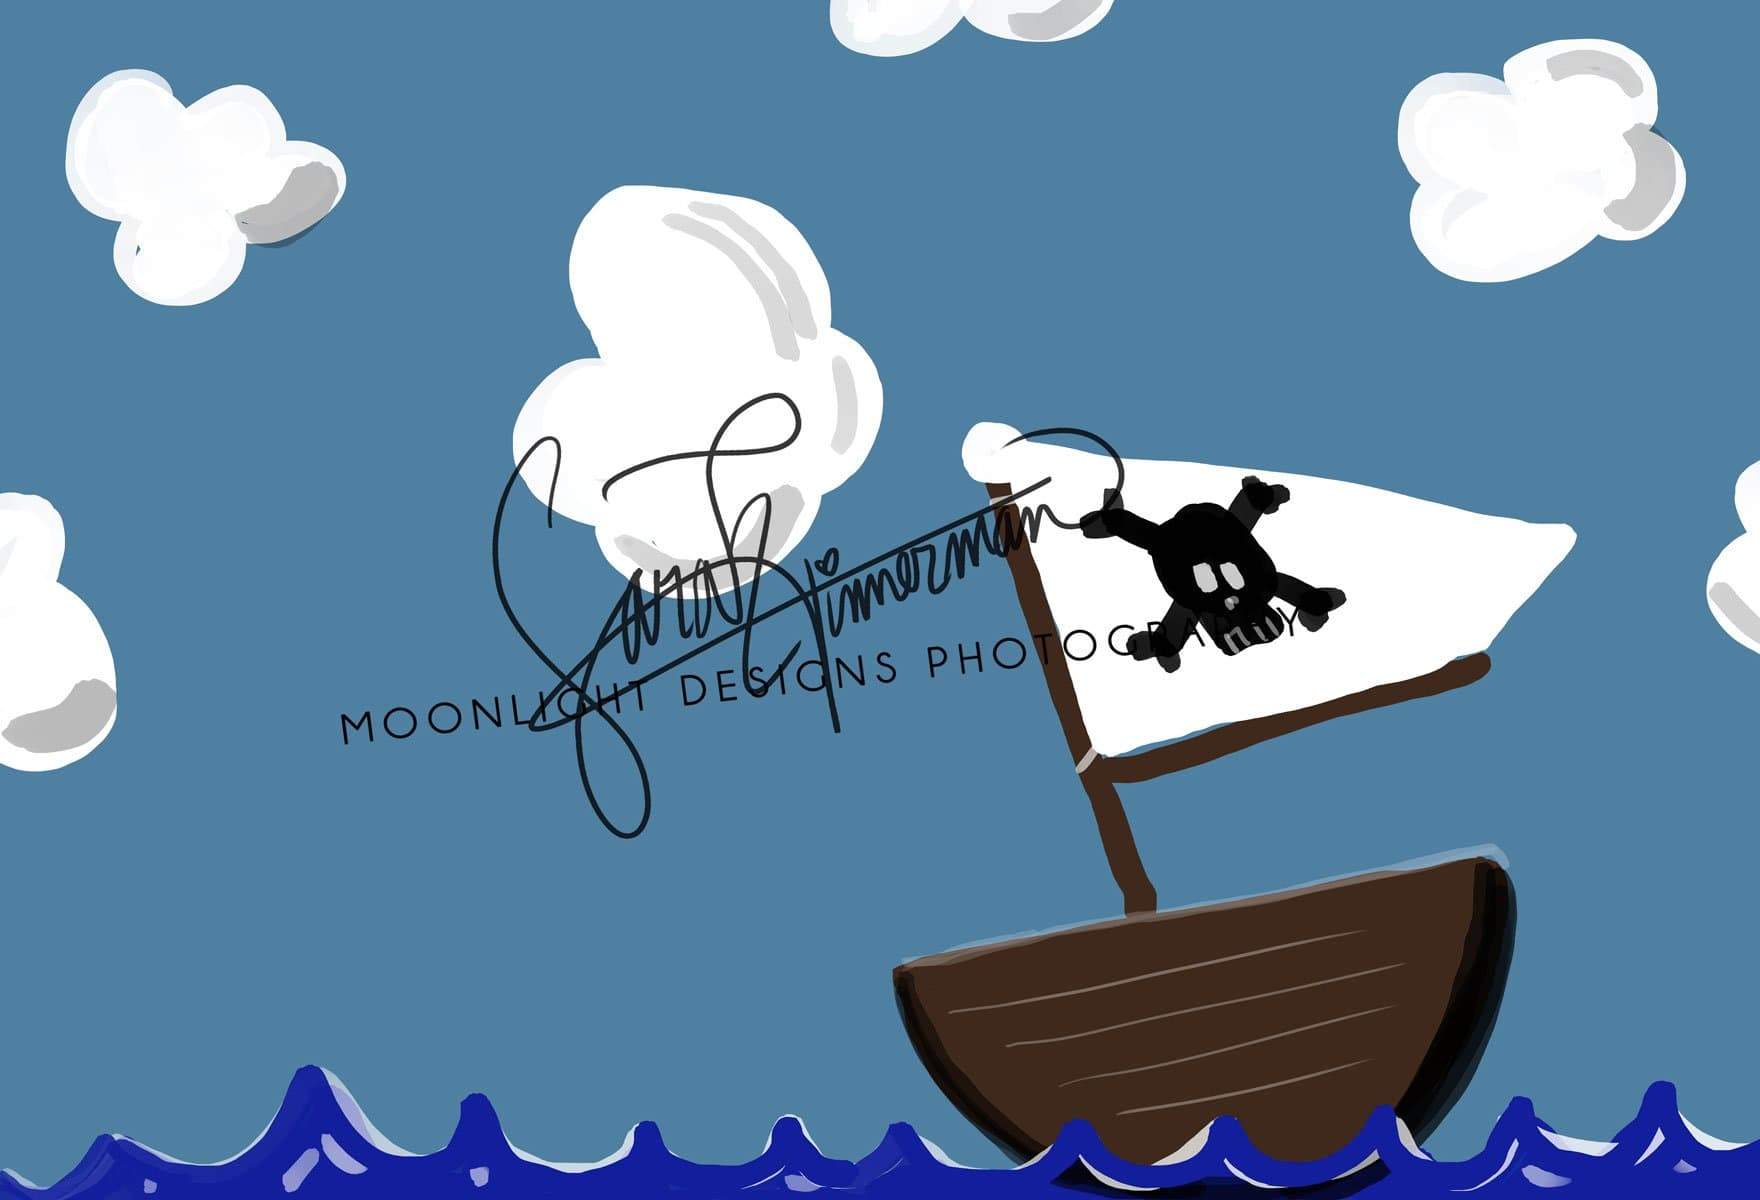 Kate Pirate Sea and Clouds Children Backdrop for Photography Designed by Sarah Timmerman